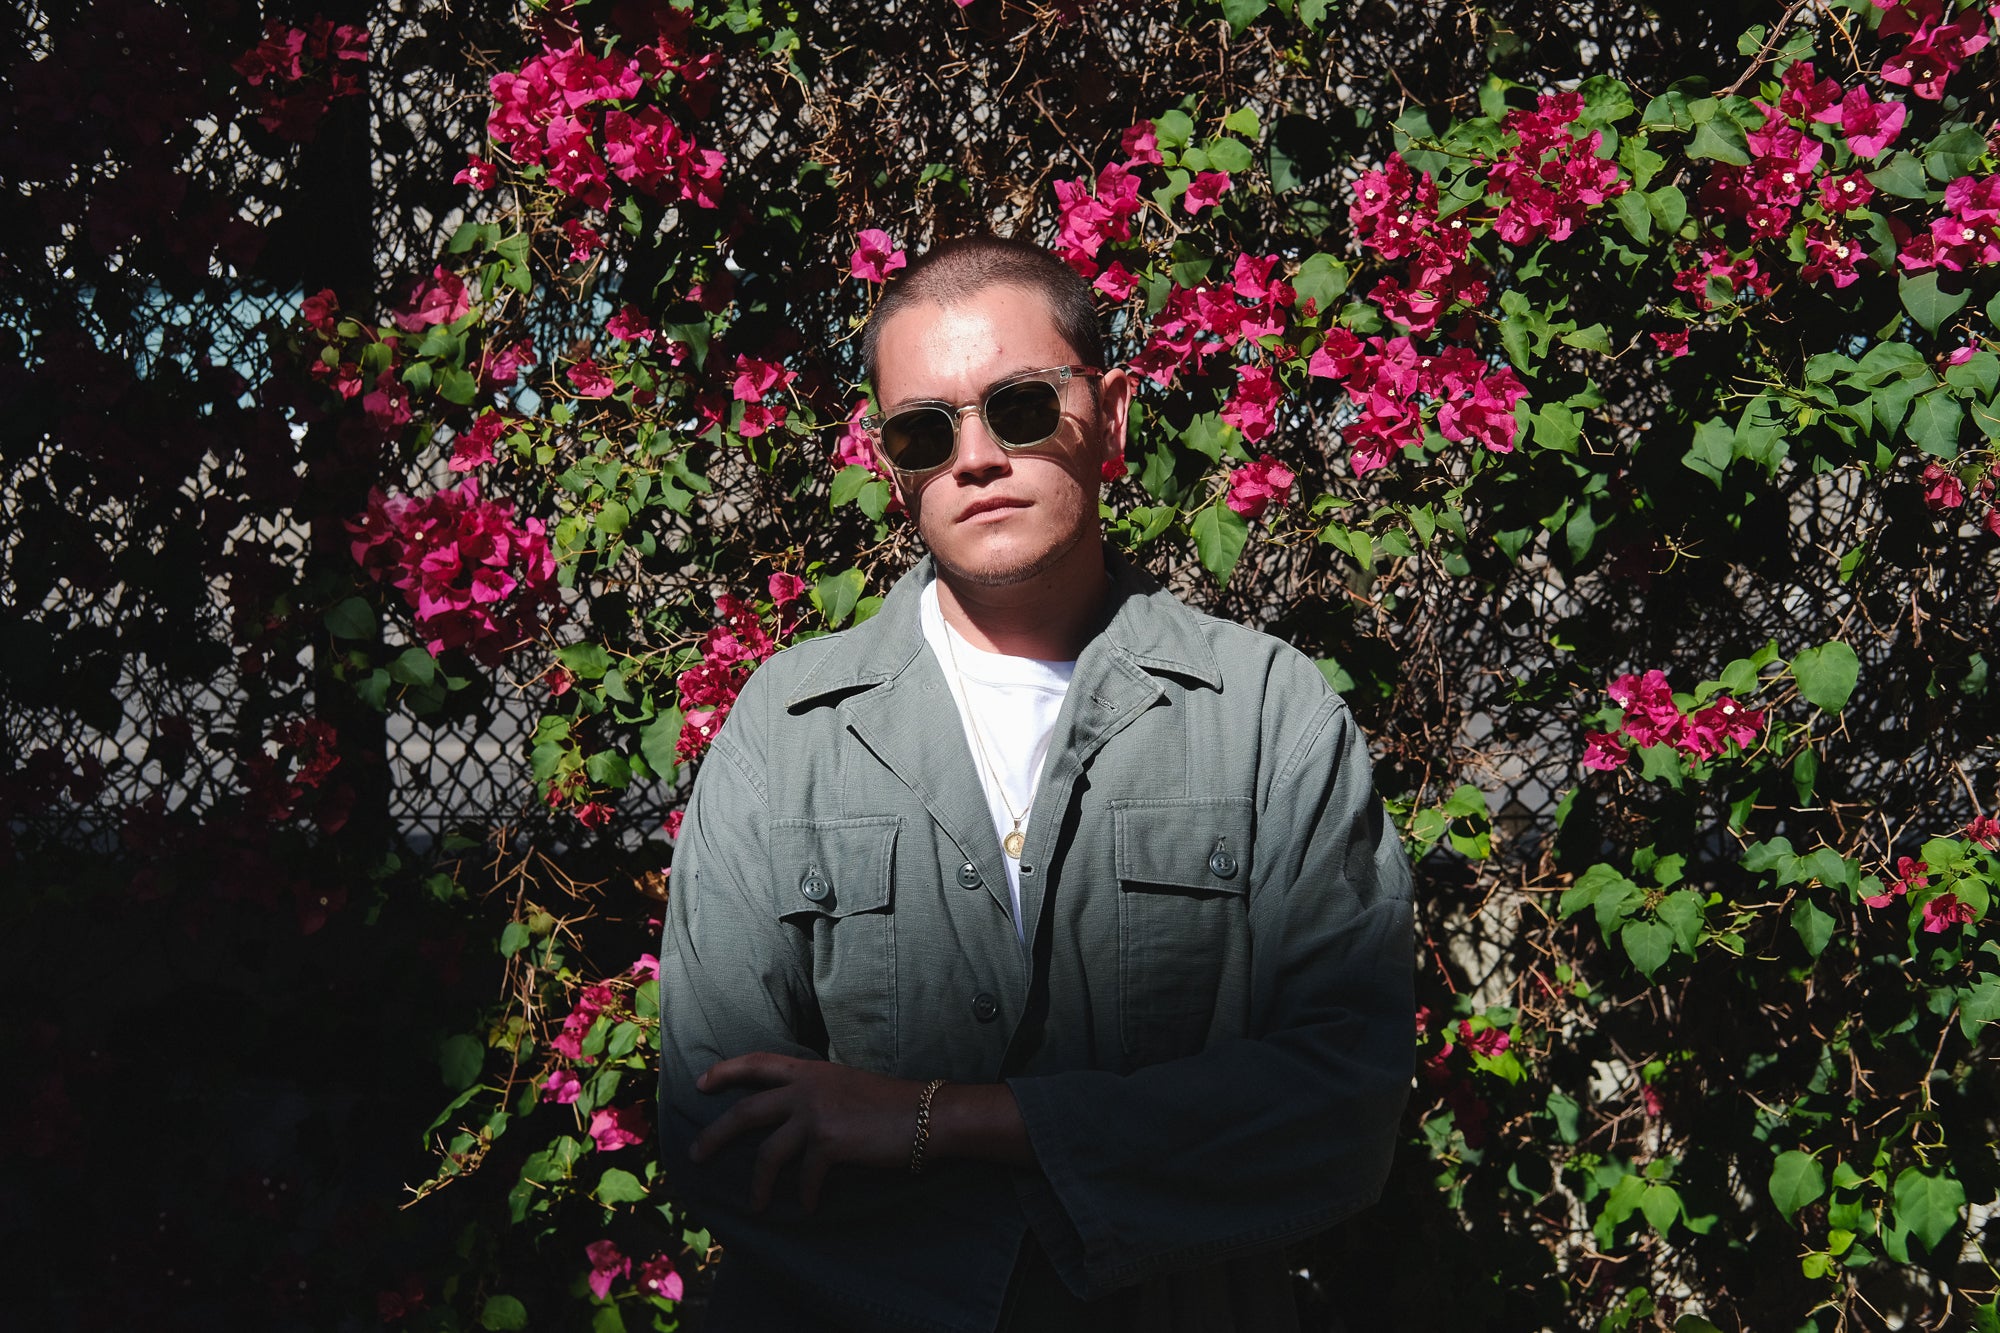 A man in sunglasses and an olive jacket stands in front of pink flowers.